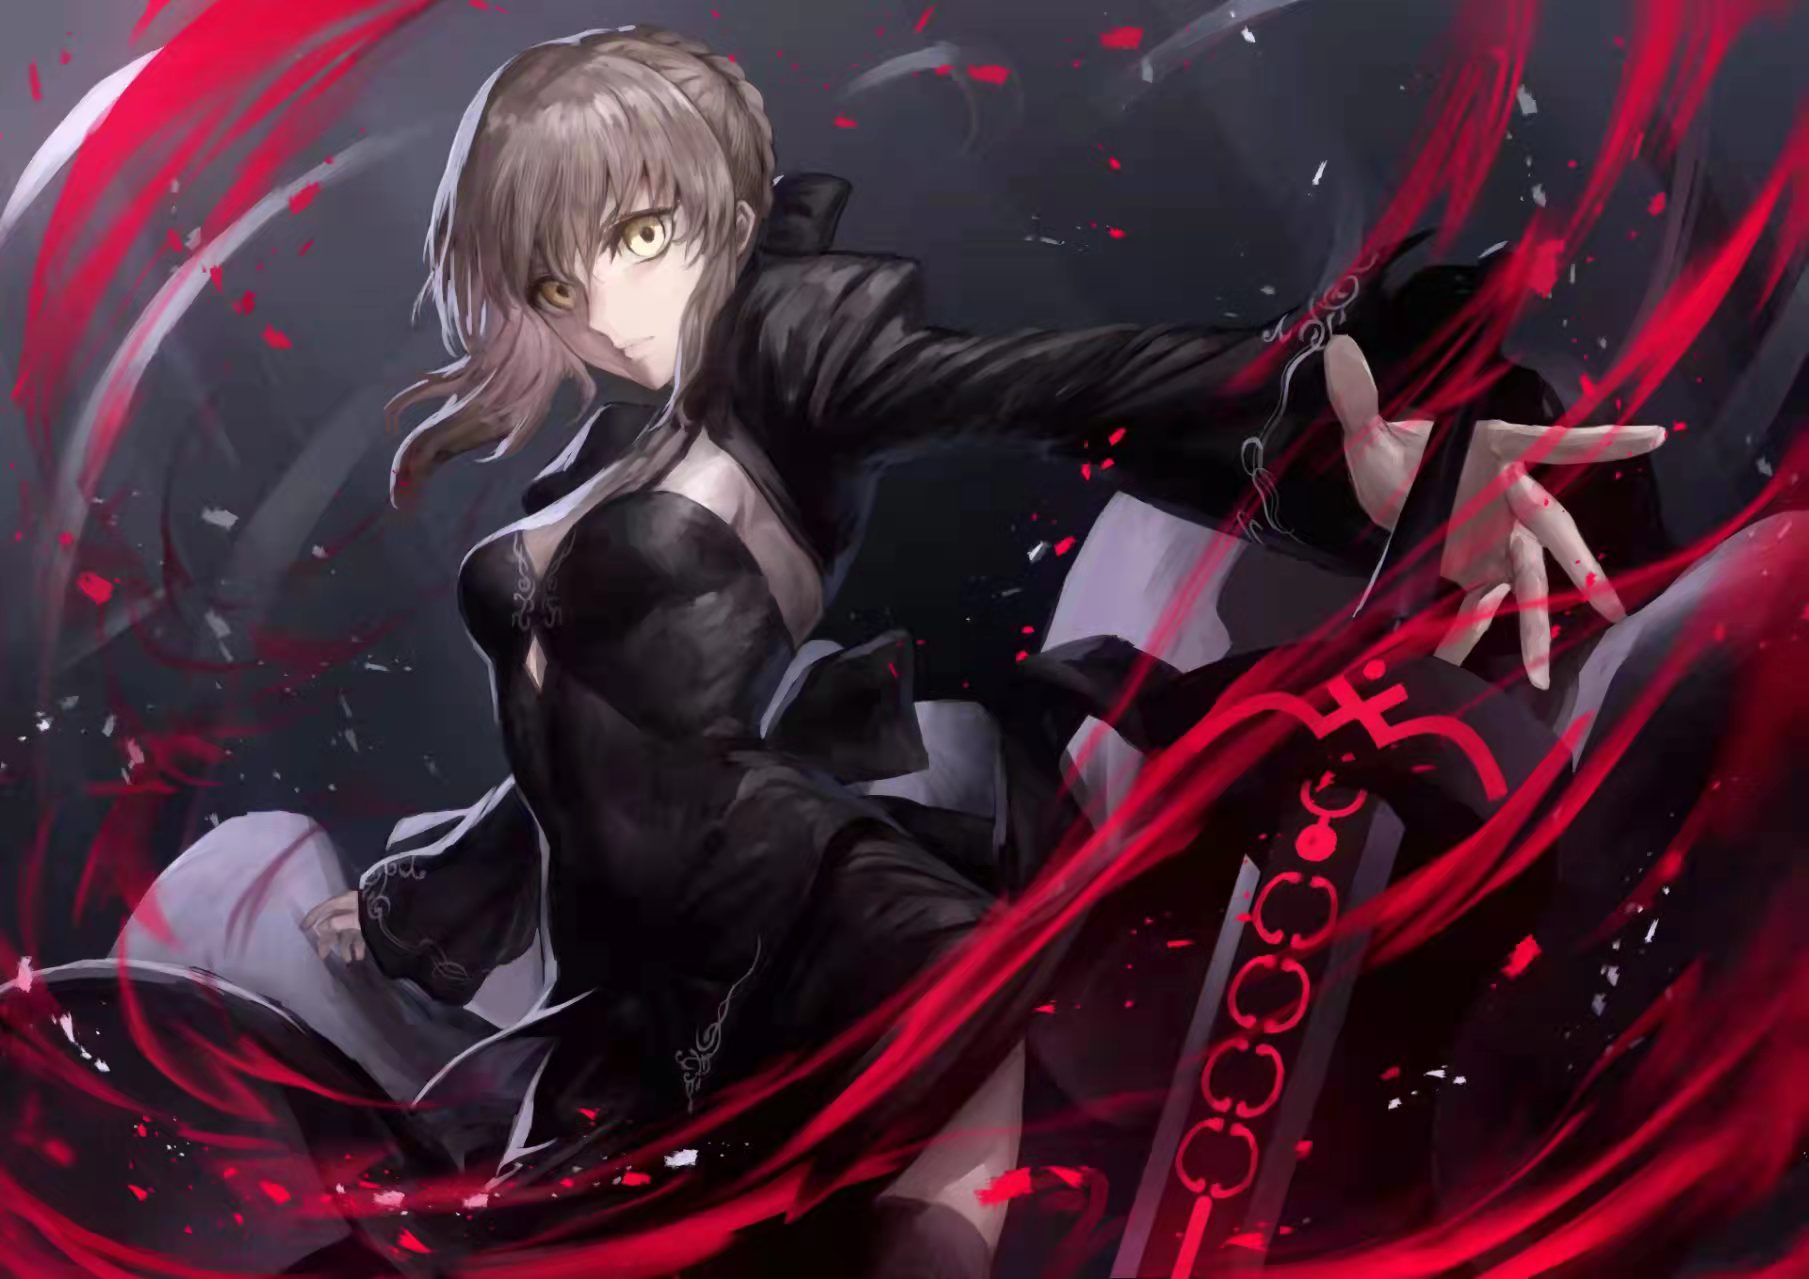 Saber Fate Series Fate Grand Order Saber Alter Sword Women With Swords Fate Stay Night Fate Stay Nig 1809x1279